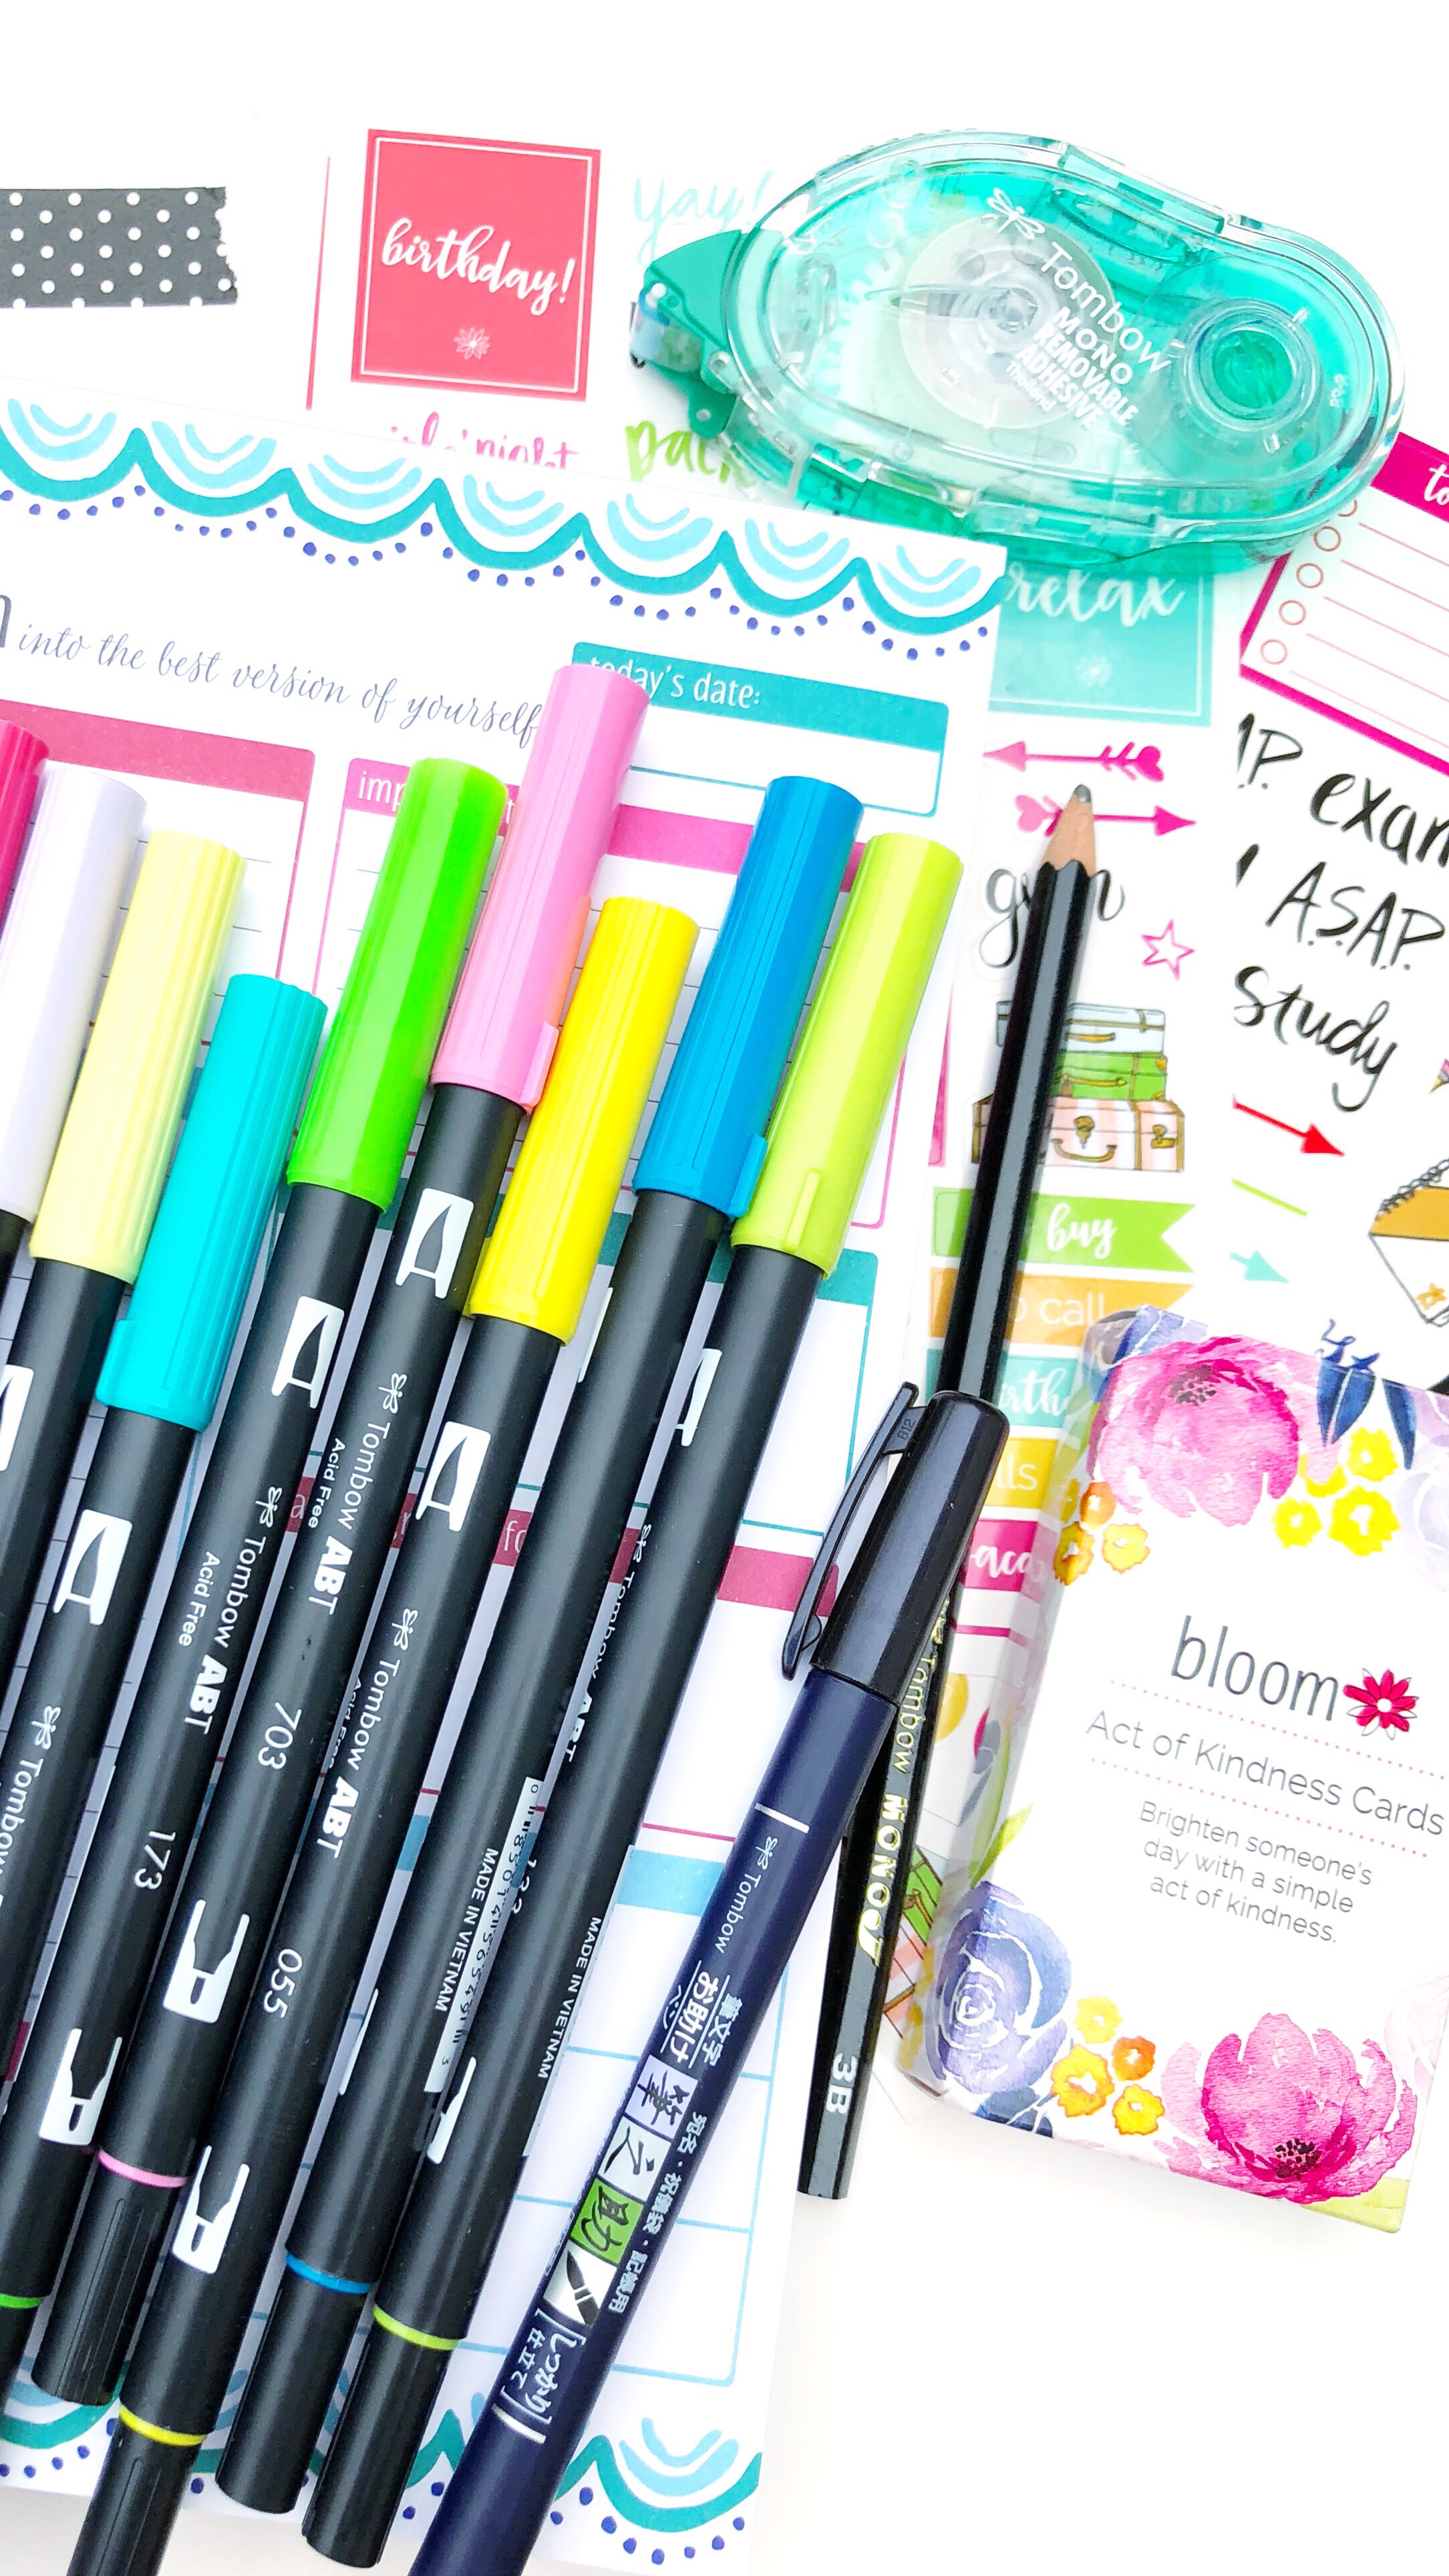 Lauren Fitzmaurice of Renmade Calligraphy shows you 3 ways to plan with the heart using Tombow and Bloom Planner products.